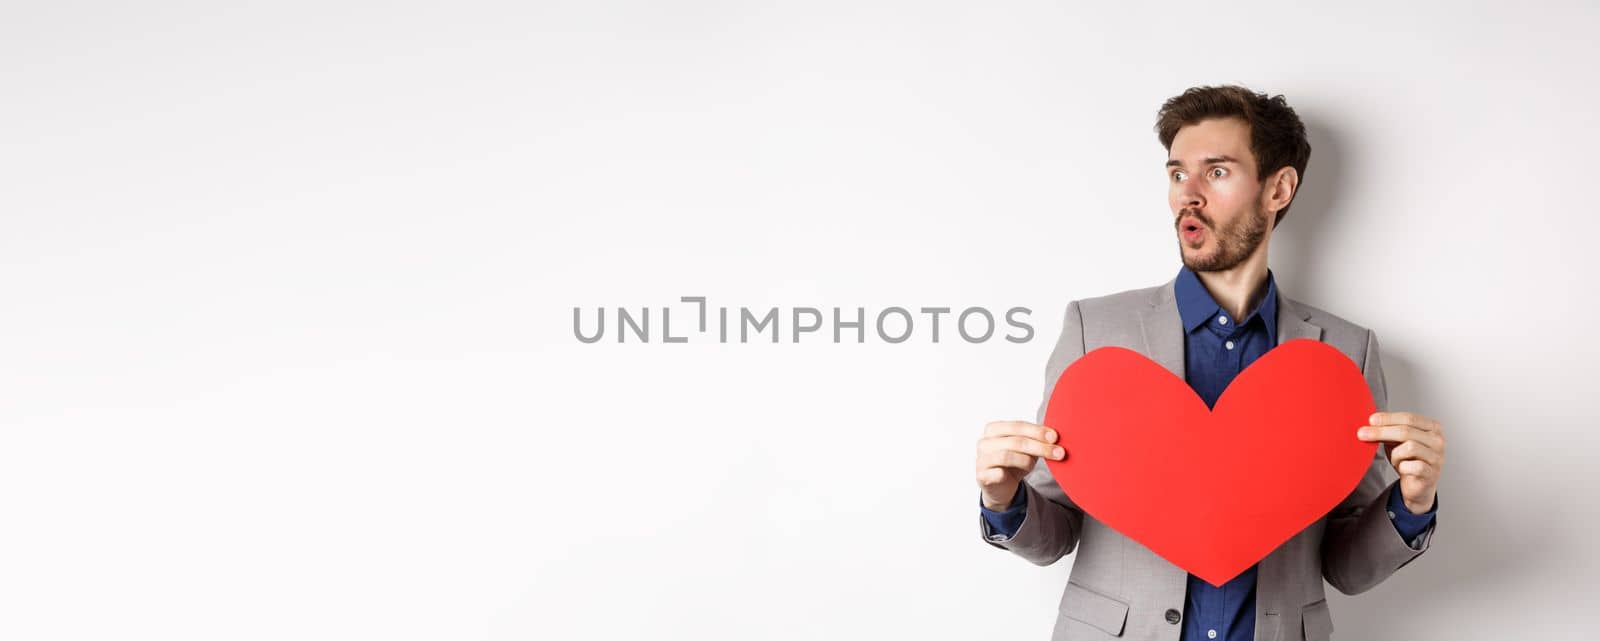 Man looking amazed at someone beautiful, holding big red heart cutout, standing on Valentines day over white background. Copy space